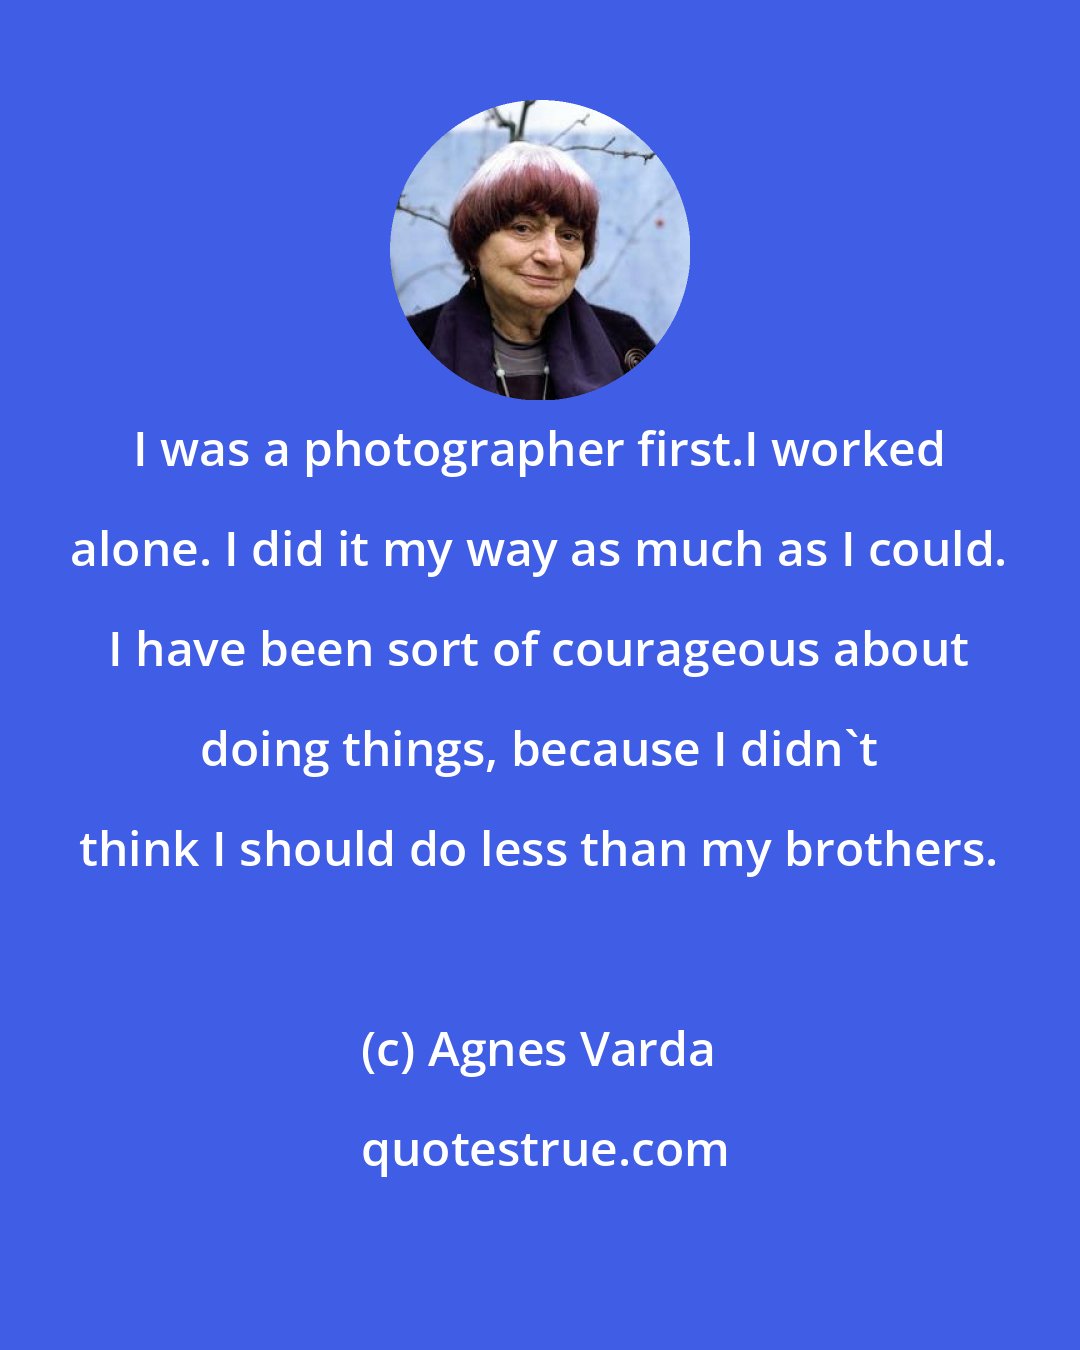 Agnes Varda: I was a photographer first.I worked alone. I did it my way as much as I could. I have been sort of courageous about doing things, because I didn't think I should do less than my brothers.